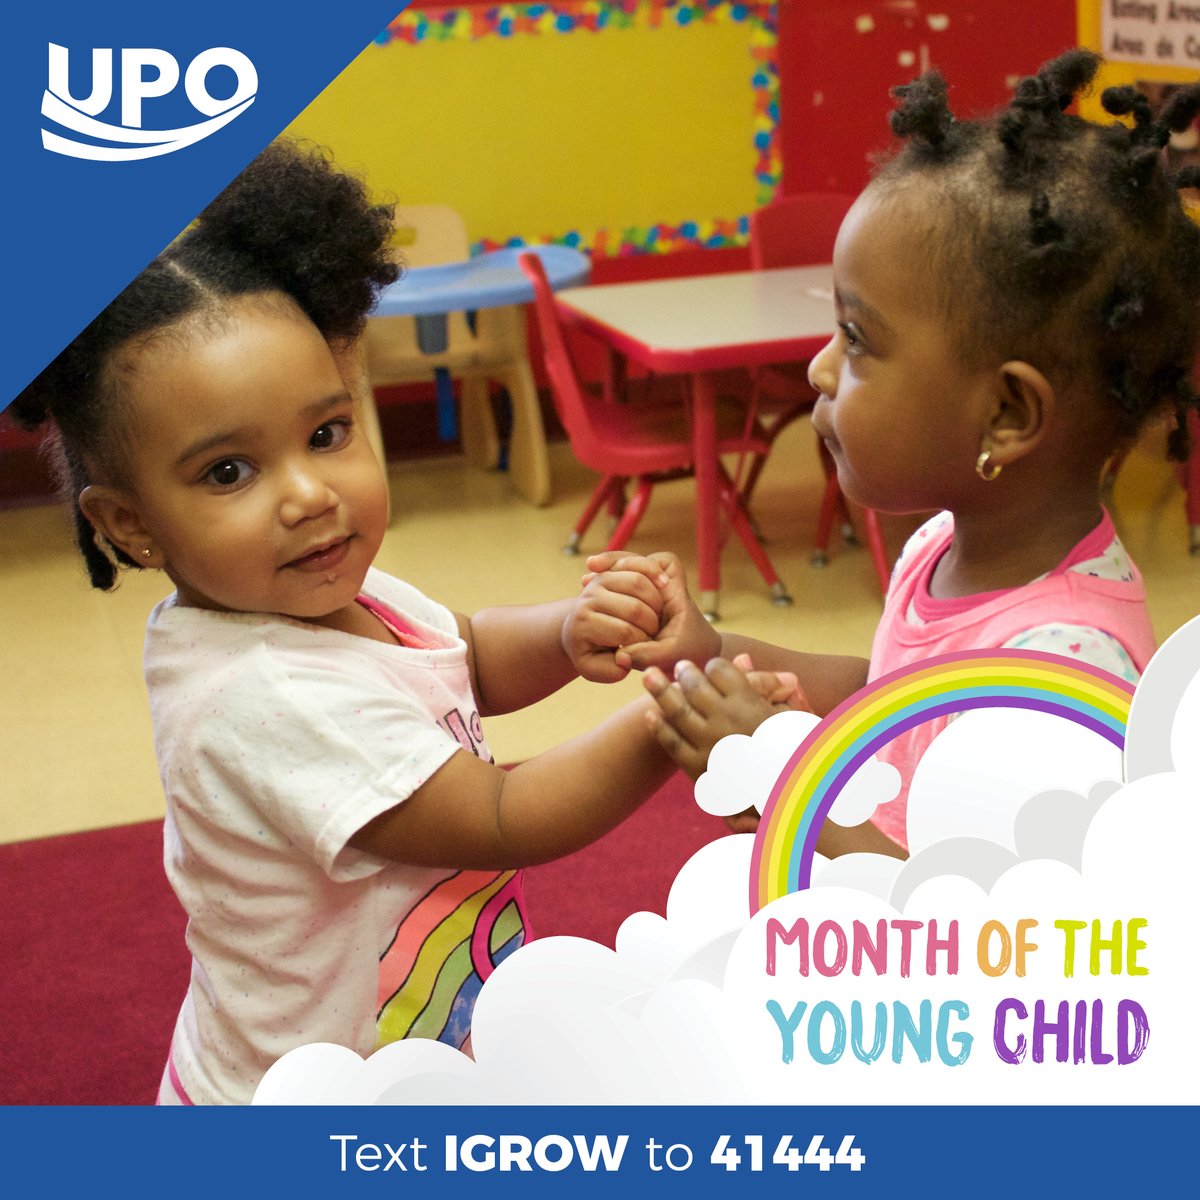 We’re celebrating the 1st 1,000 days of a child’s life! Even before that, we help pregnant moms & expectant families. (UPO is DC’s largest Early Head Start provider.) #UPOeducates #IamUPO #UPOinDC #MonthoftheYoungChild #MOYC24 @DCAEYC @BainumFdn @Mark_Shriver @SavetheChildren